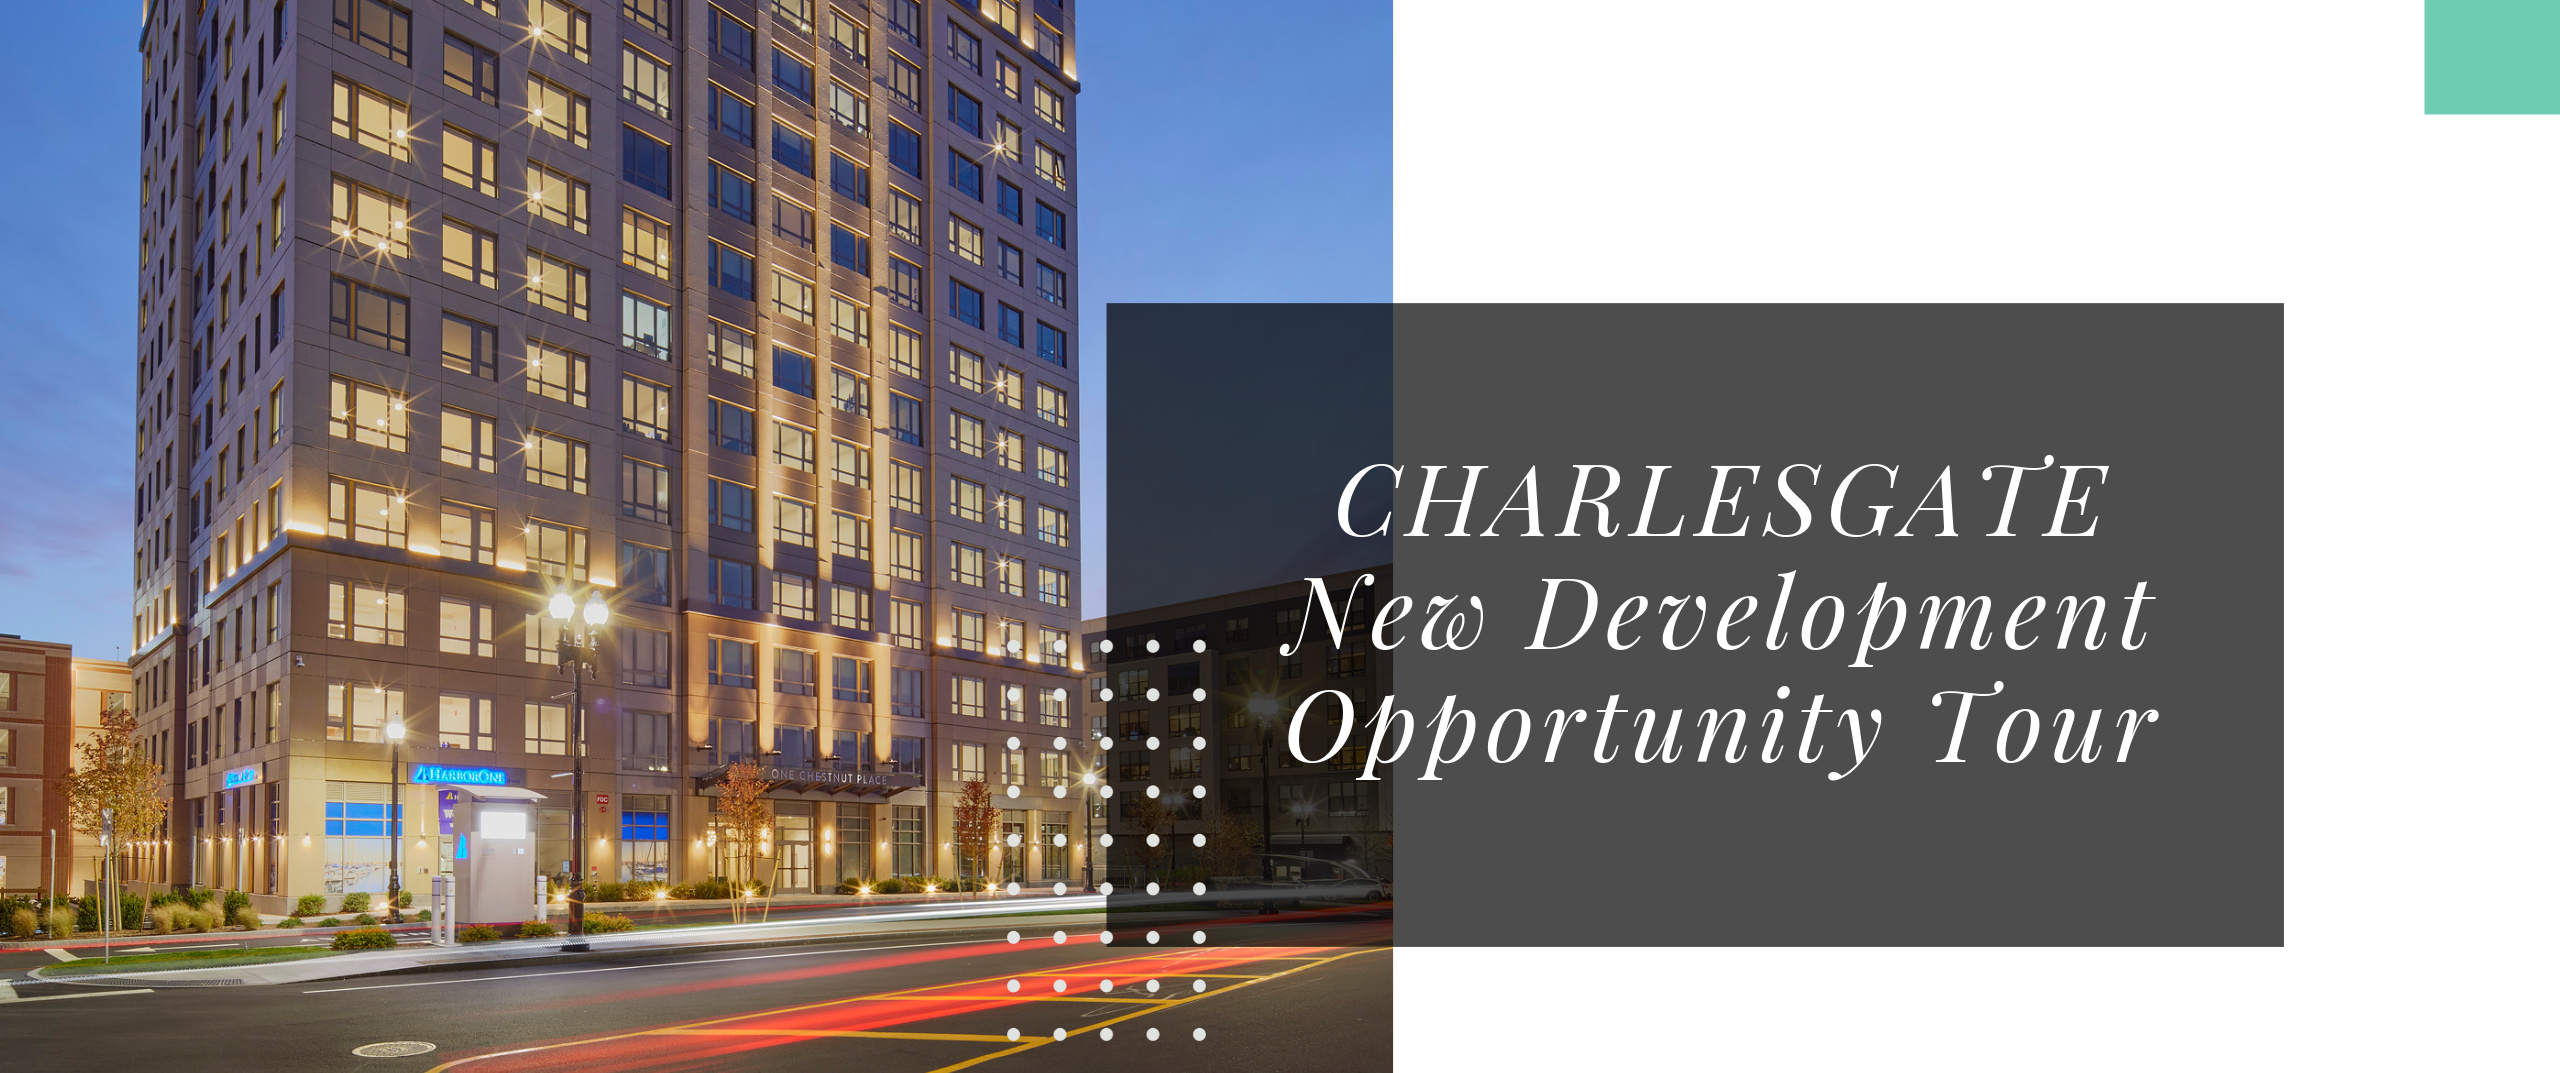 CHARLESGATE Conducts New Development Opportunity Tour